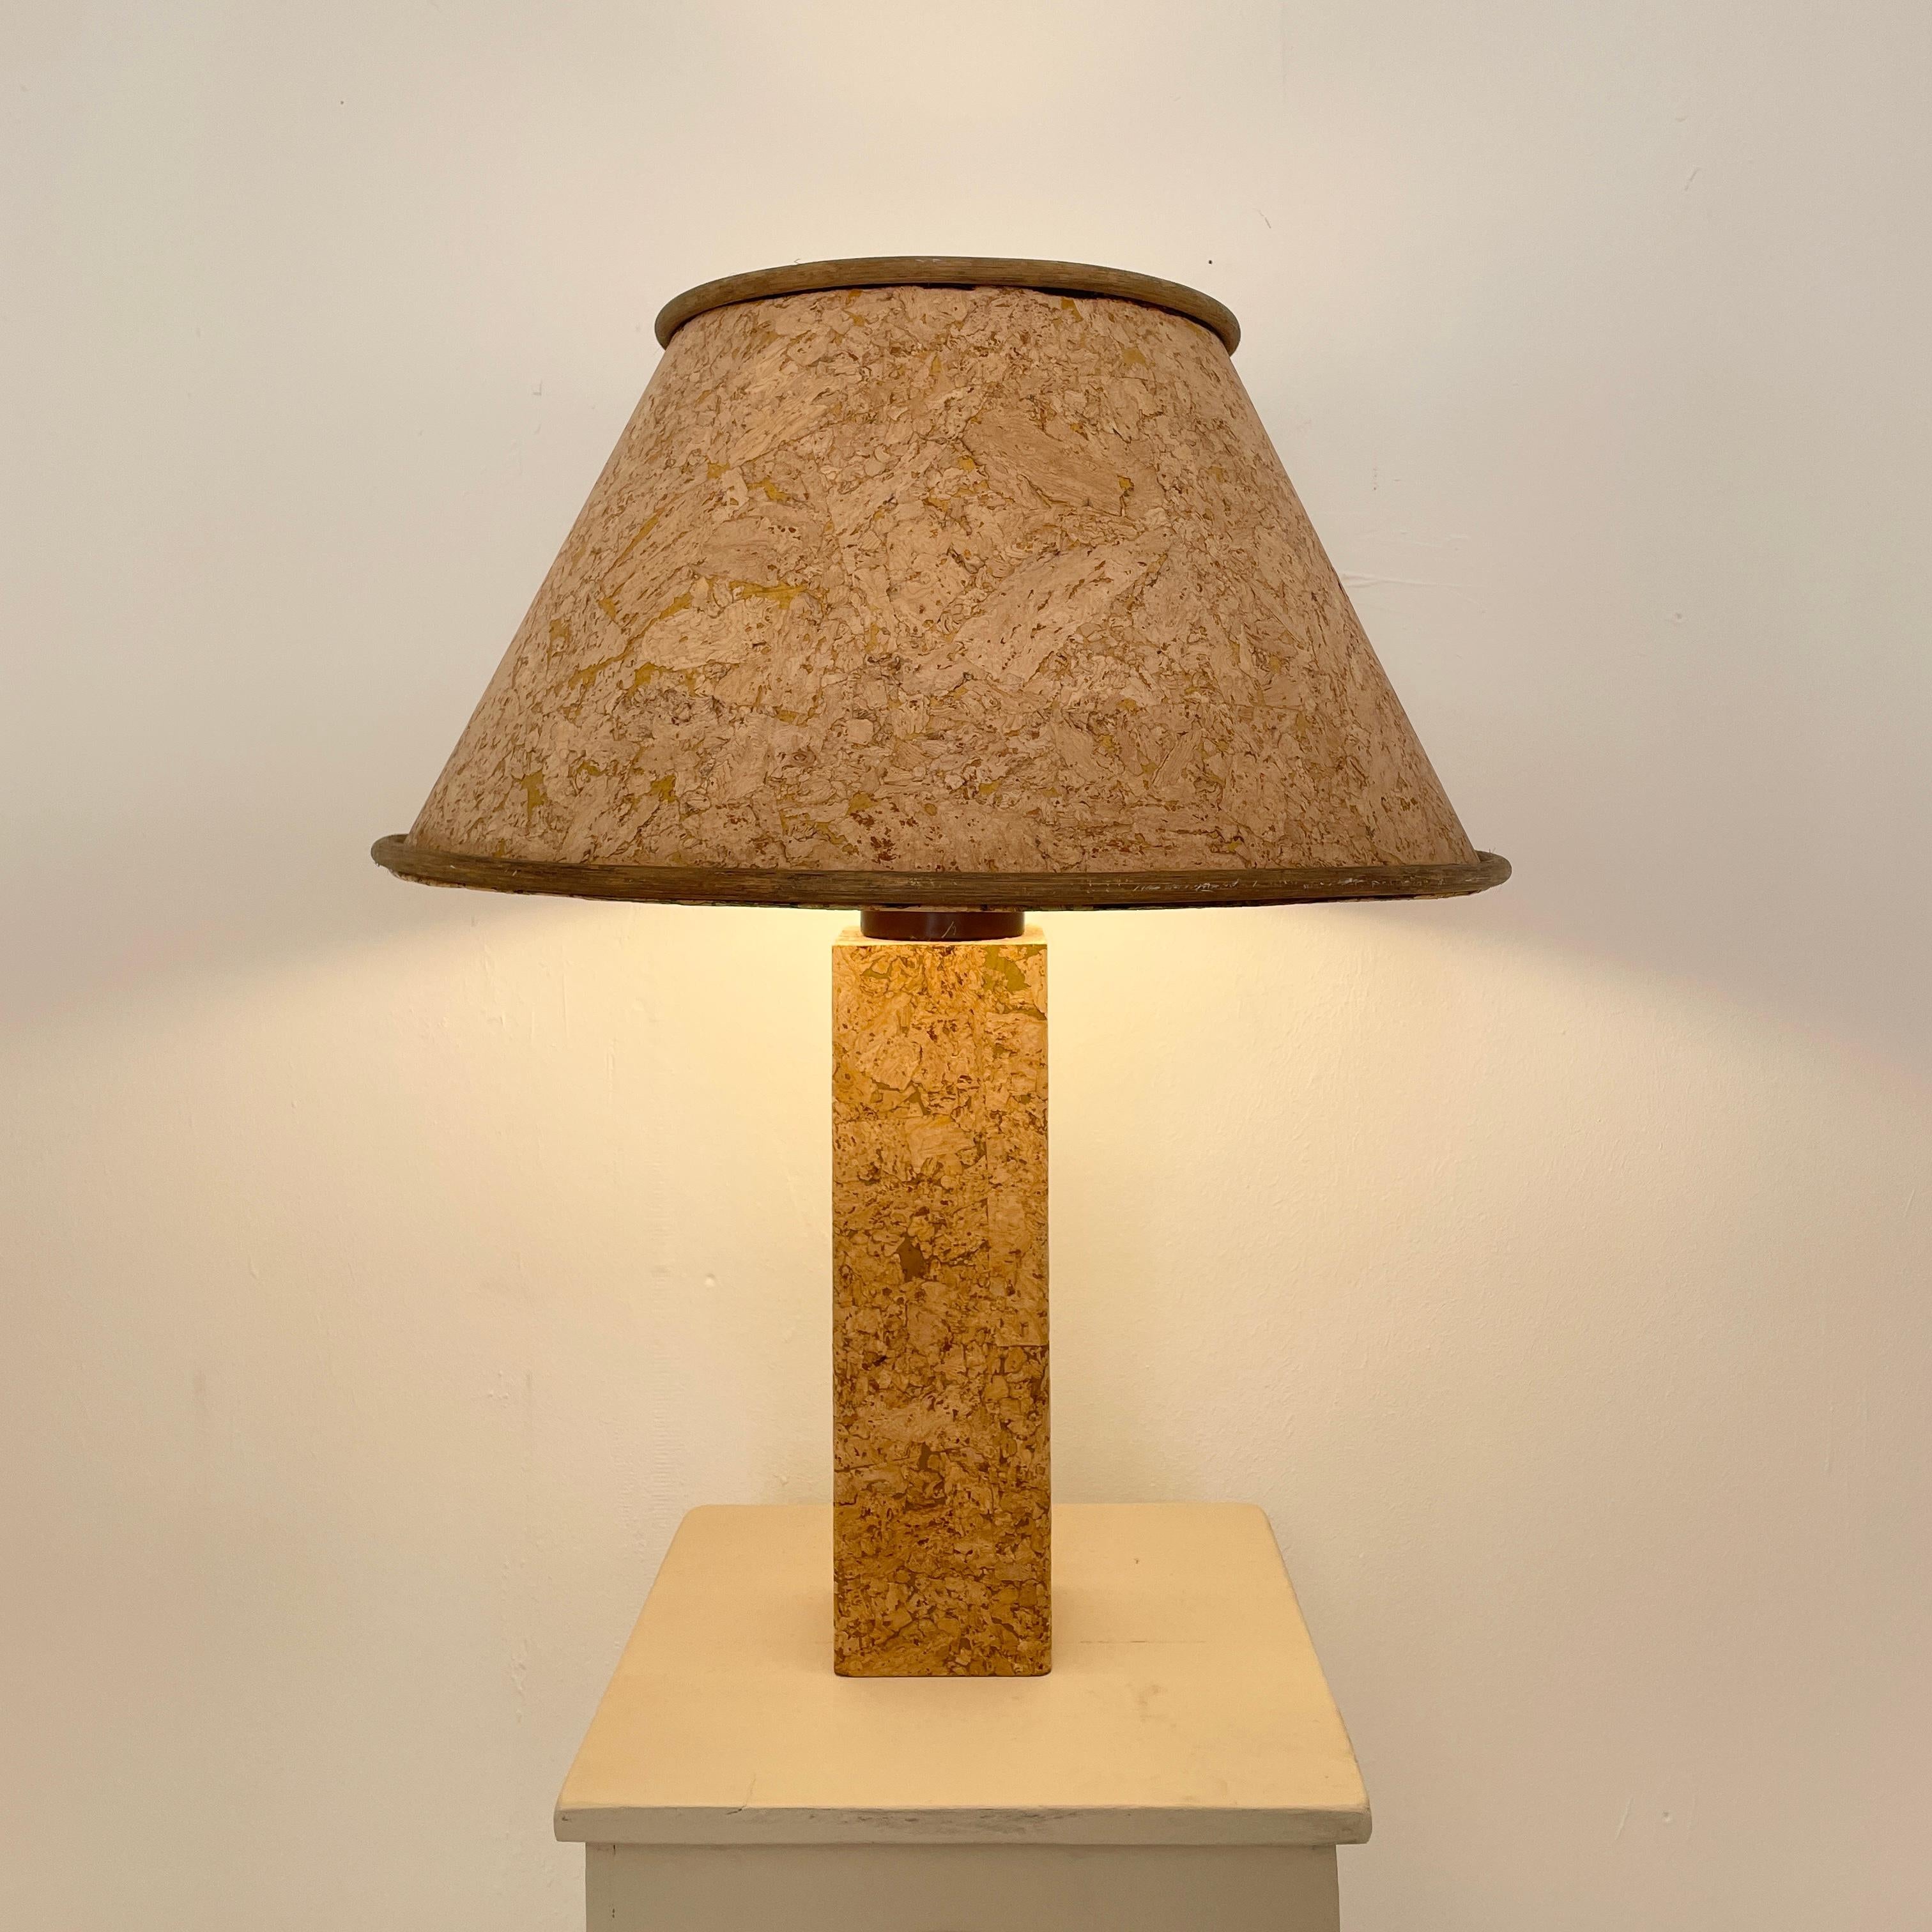 This fantastic Mid Century Brown Cork table lamp in the Style of Ingo Maurer was made in the 1970s.
The base is wood which is veneered in cork and the shade is also in cork which makes a beautiful light.
This piece is in a great original vintage